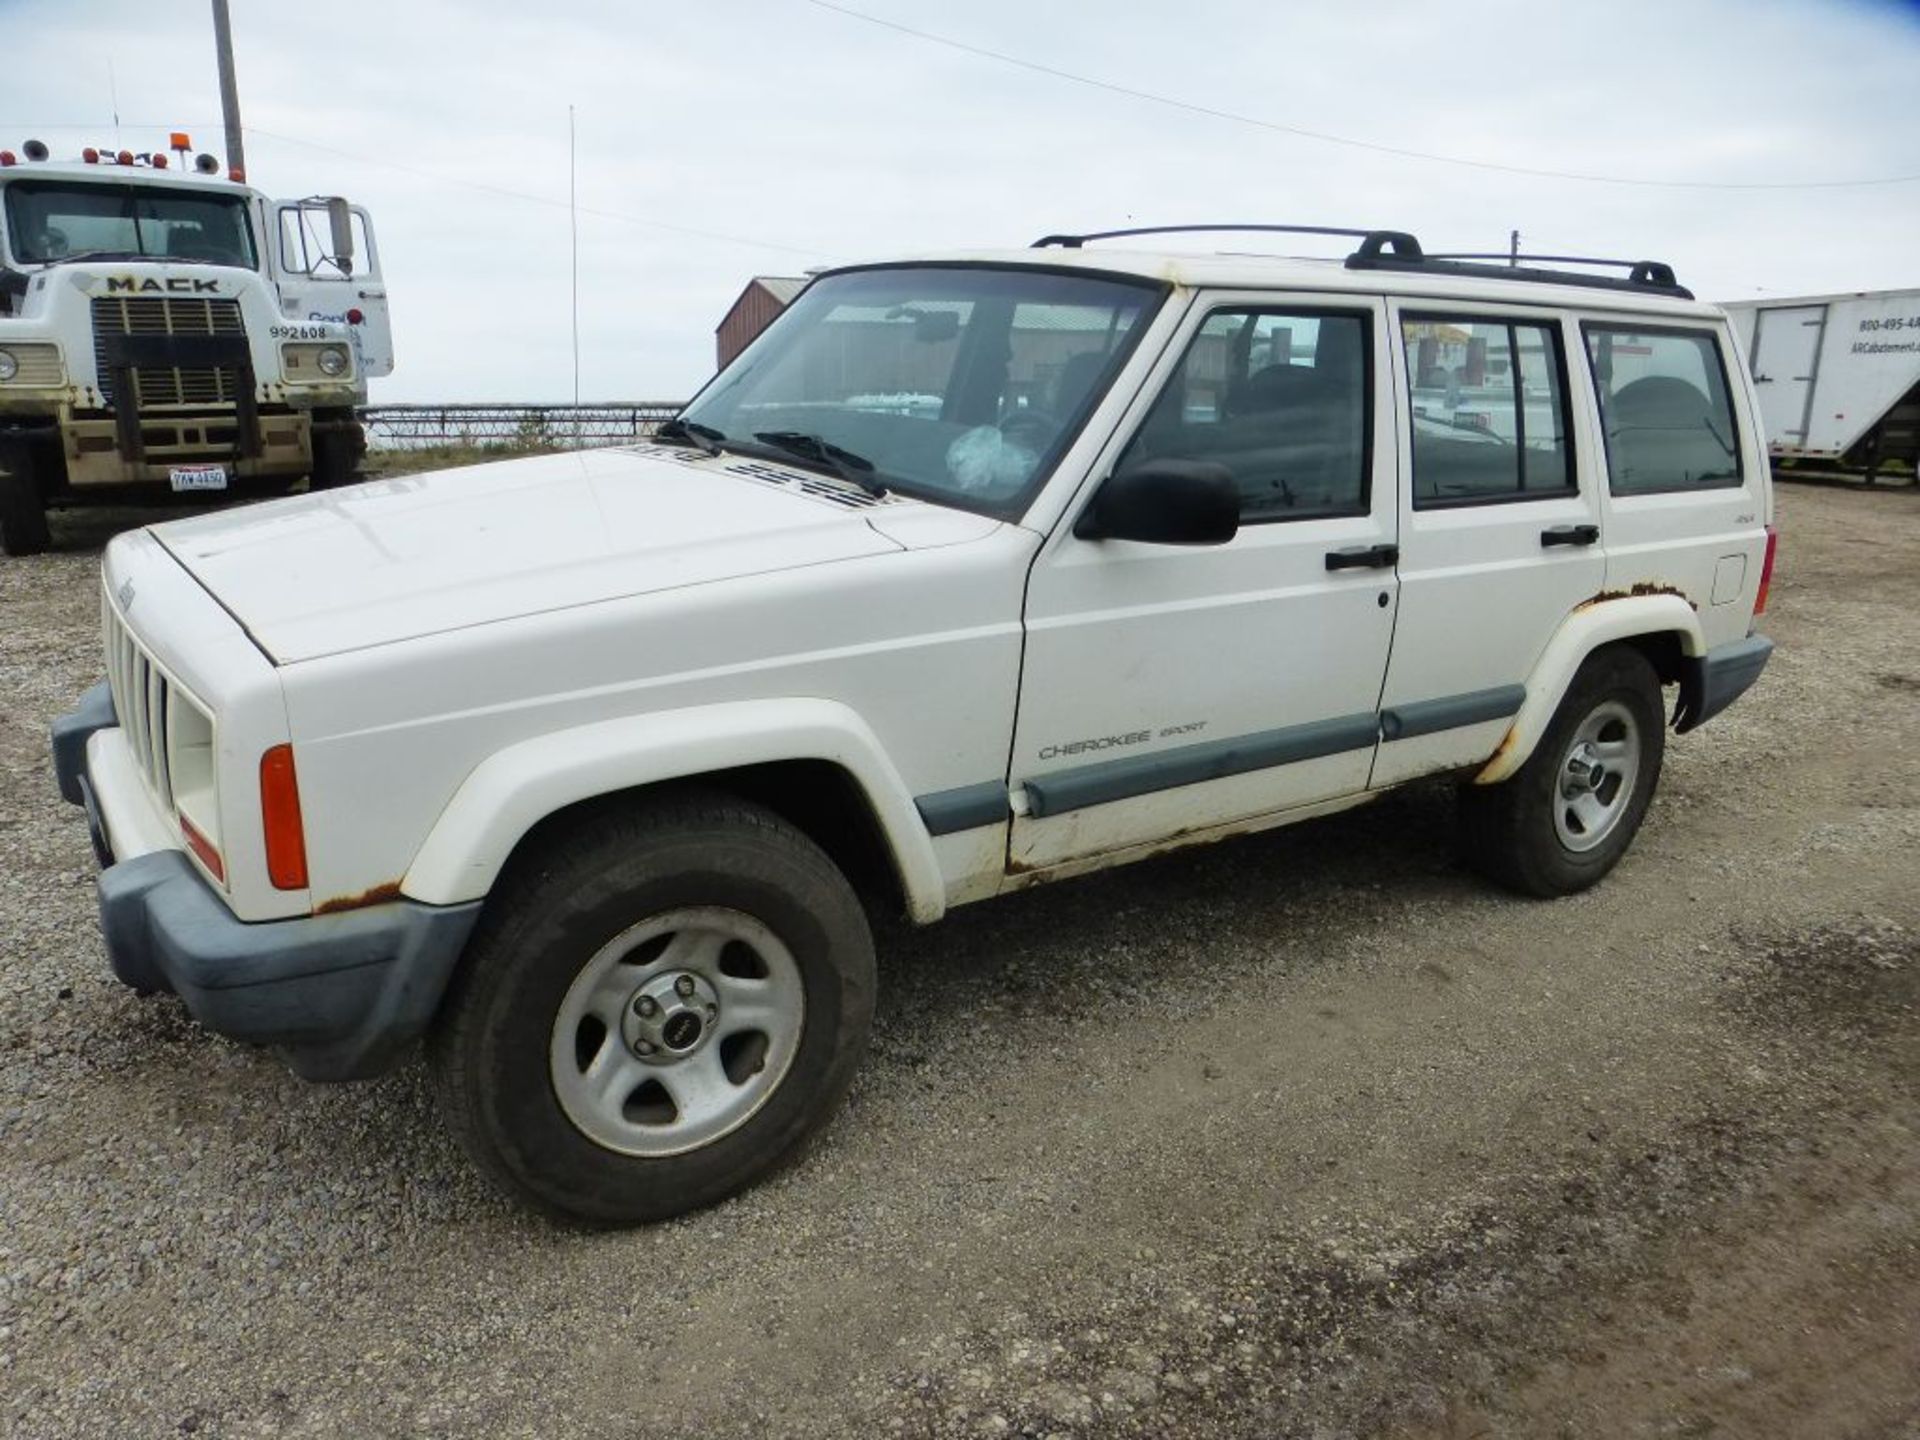 2000 Jeep Cherokee Sport | Vin No. 1J4FF48S4YL180819; 66,272 Miles; 4-WD; 6-Cyl 4.0L; Titled, Non-